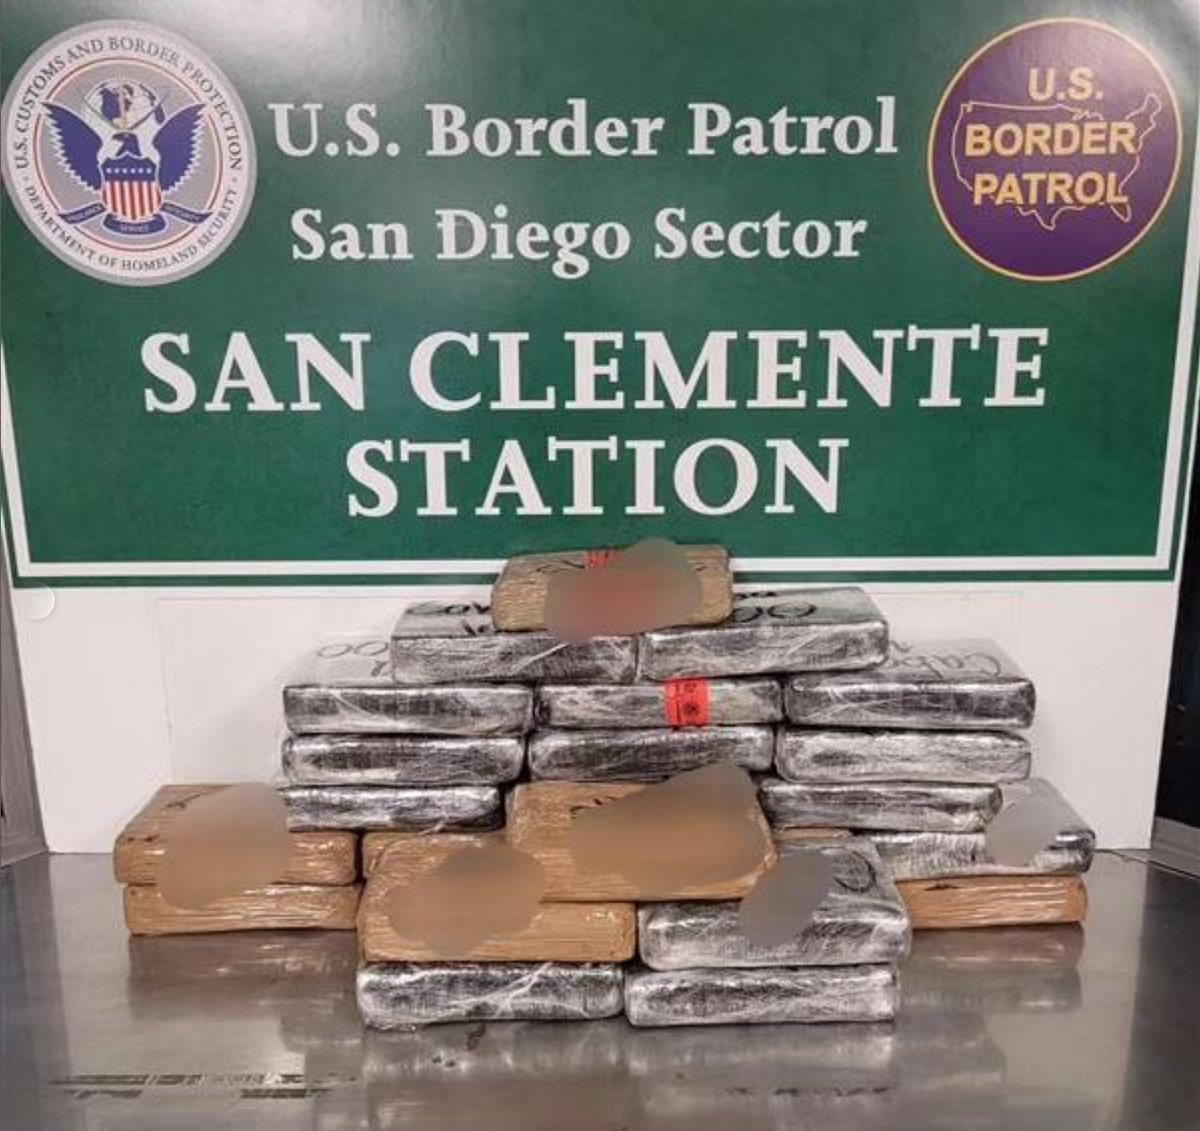 This past week, USBP agents & their partners seized +700 lbs. of hard narcotics: +450 lbs. Cocaine +170 lbs. Fentanyl +65 lbs. of Meth +25 lbs. of Liquid Meth That's over $10M of dangerous drugs.